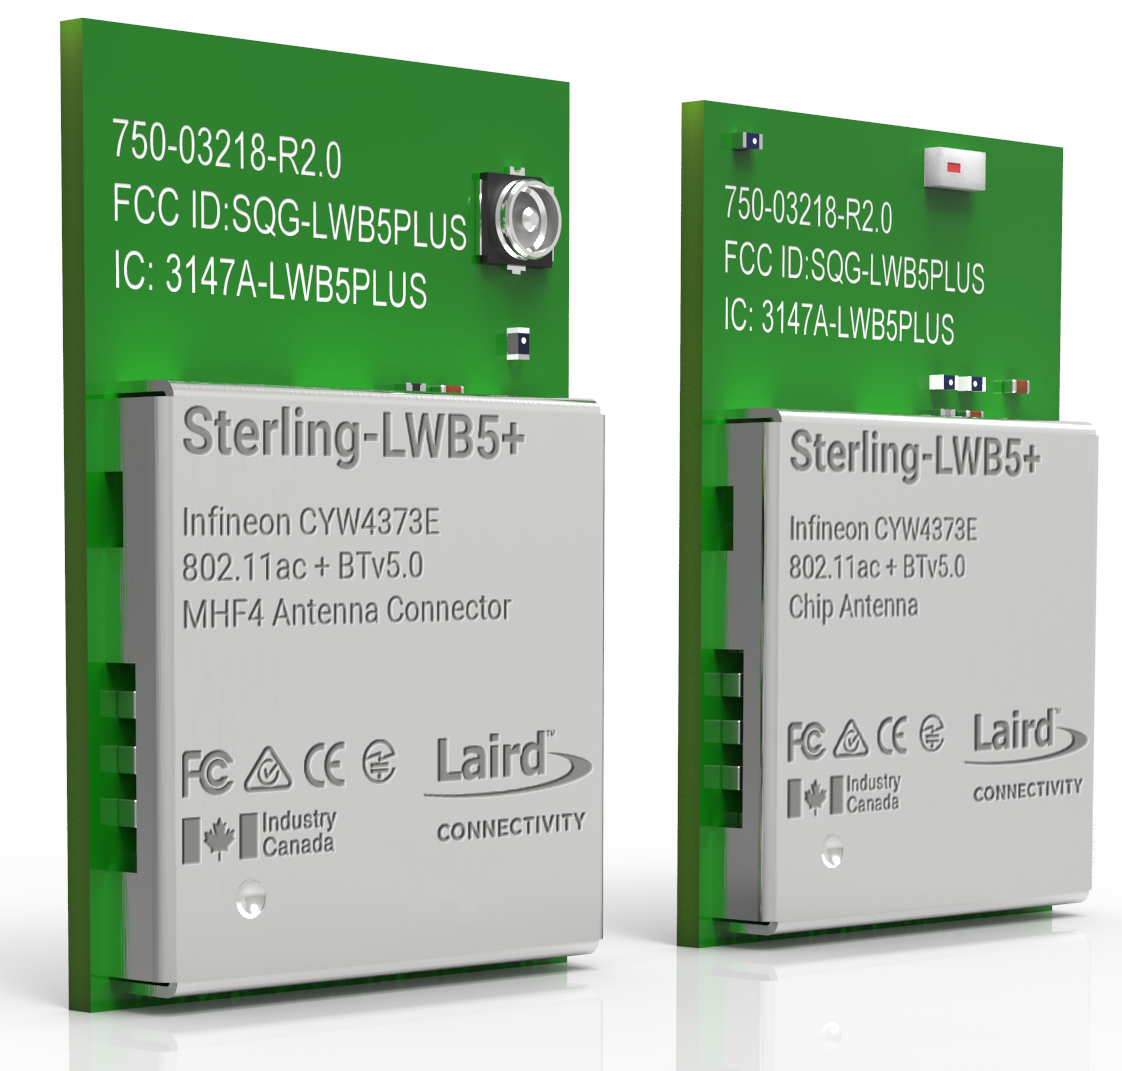 Laird Connectivity and Cypress Deliver New Wi-Fi® + Bluetooth® 5 Combo Module Purpose-Built for Industrial IoT